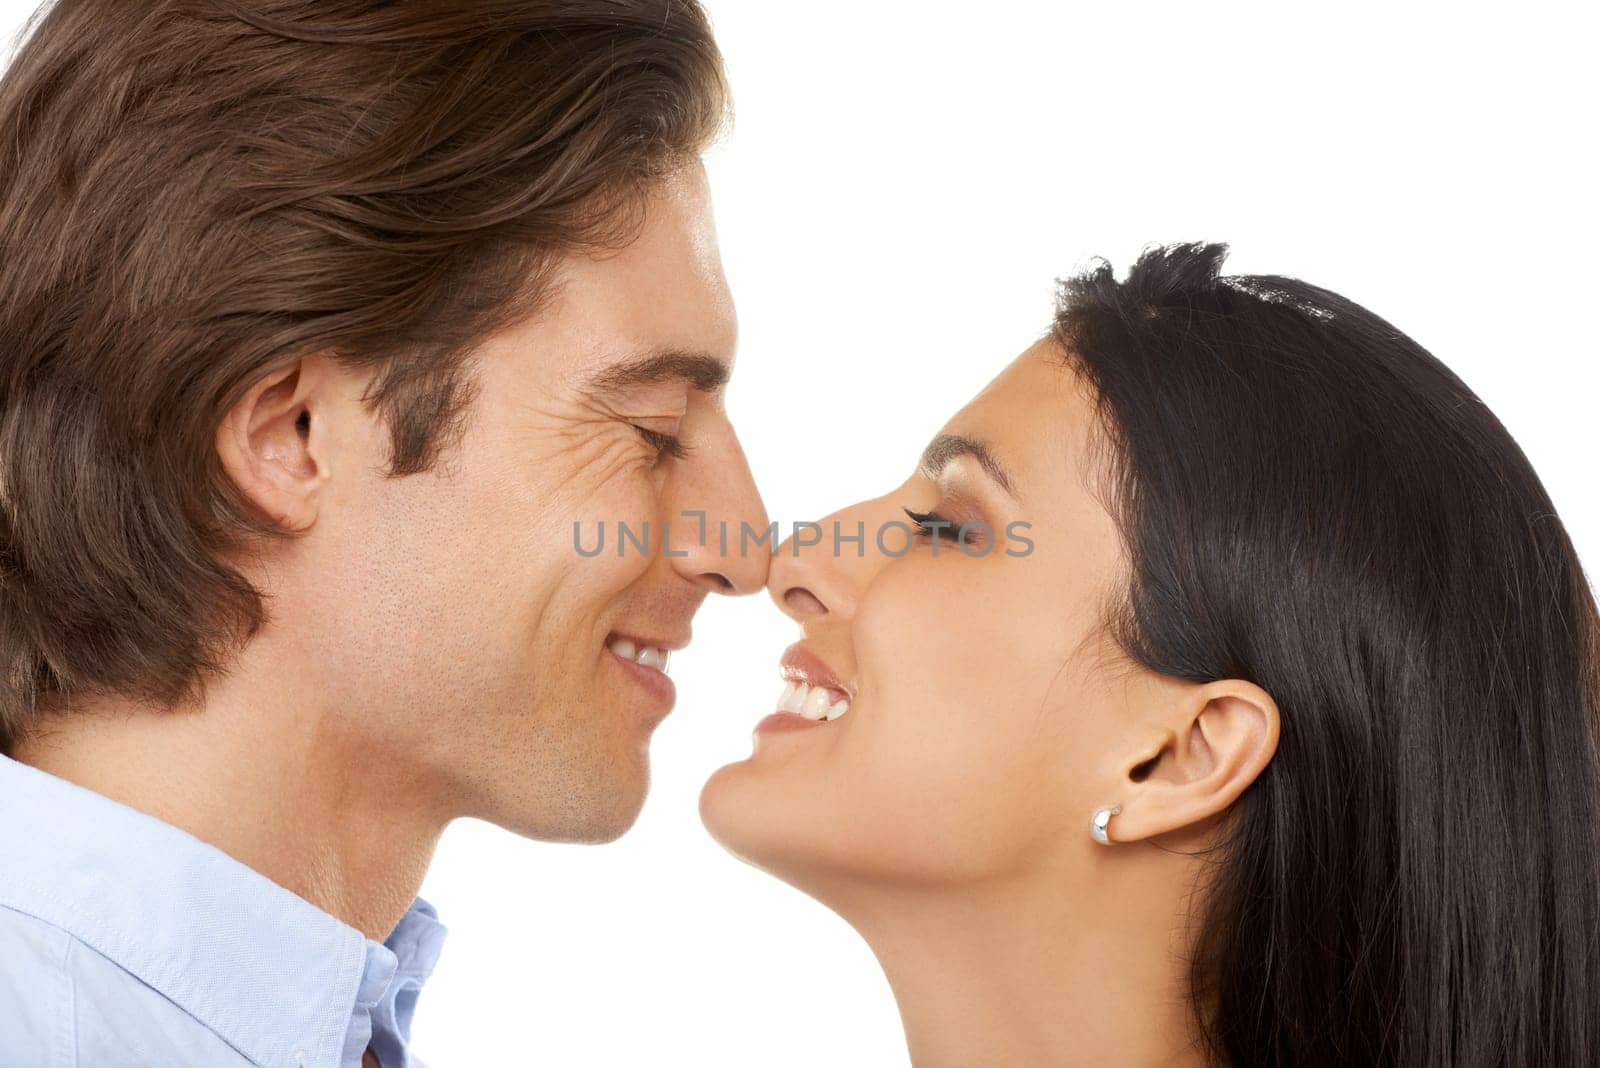 Couple, nose and smile for love or valentines day date in affection isolated against white studio background. Closeup of man and woman smiling touching faces in happiness for special month of romance by YuriArcurs